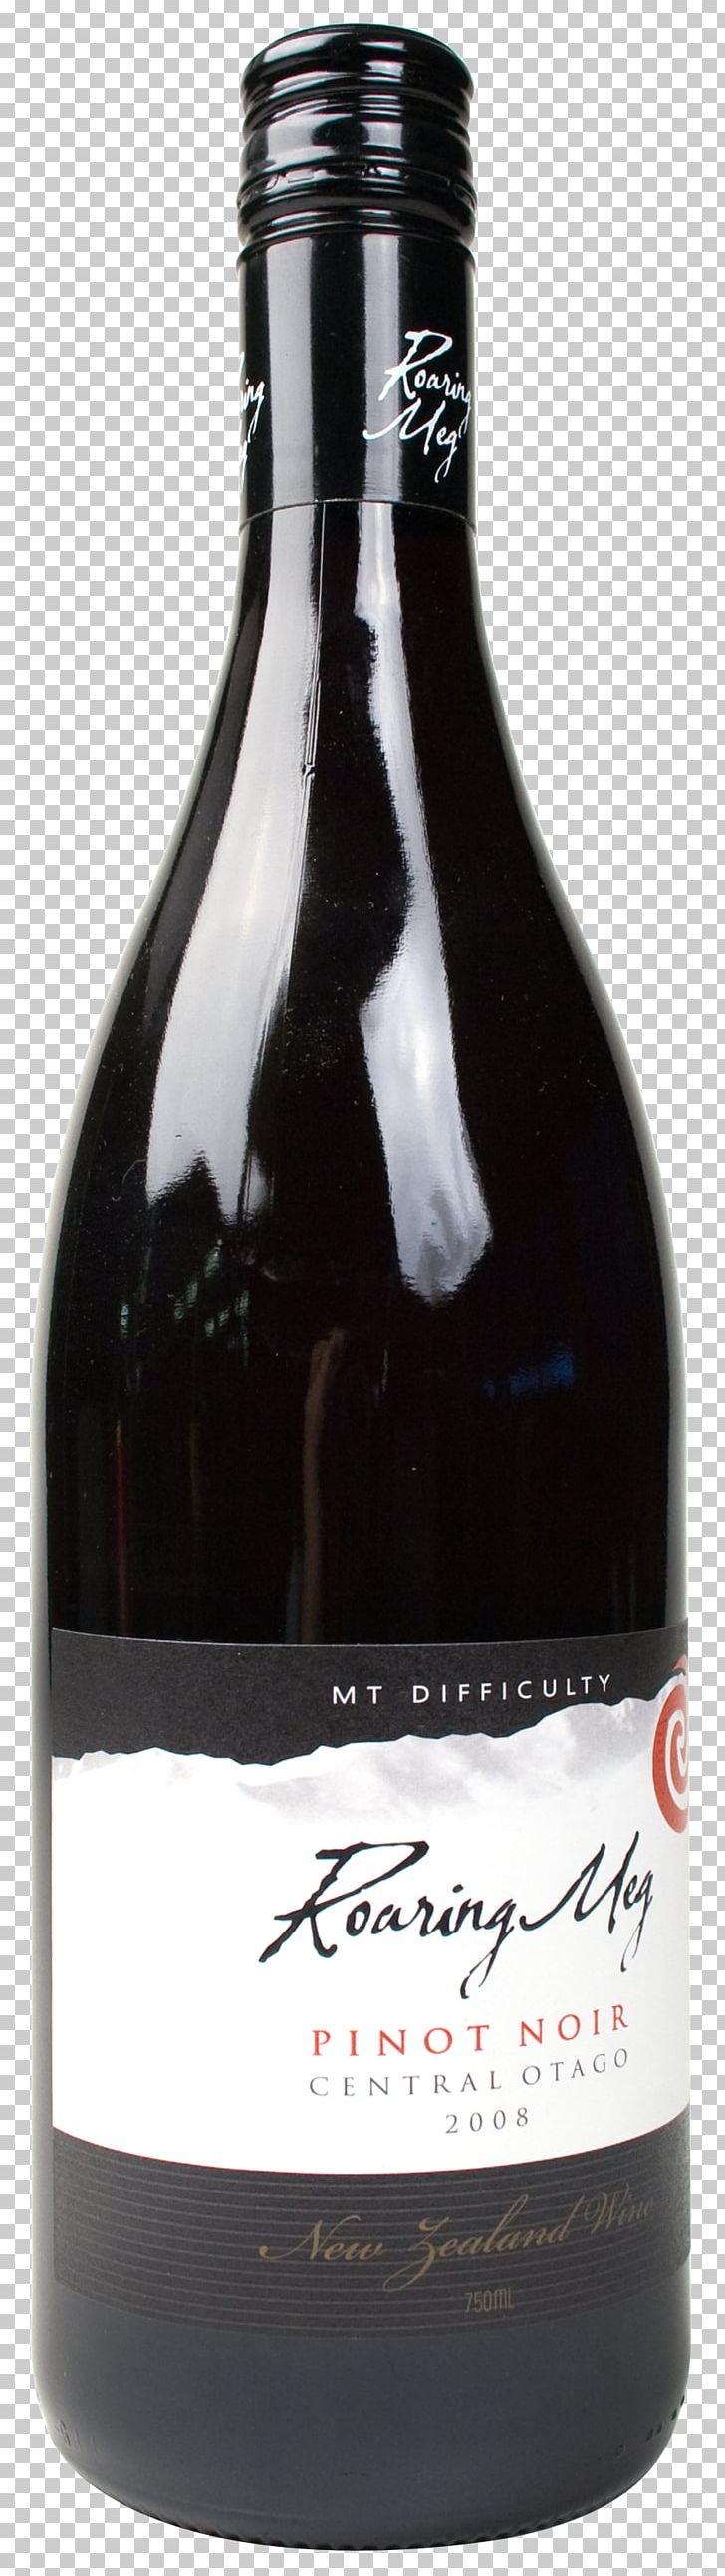 Liqueur Mount Difficulty Mt. Roaring Meg Pinot Noir 2013 Red Wine From New Zealand Dessert Wine PNG, Clipart, Alcoholic Beverage, Bottle, Central Otago, Dessert Wine, Distilled Beverage Free PNG Download